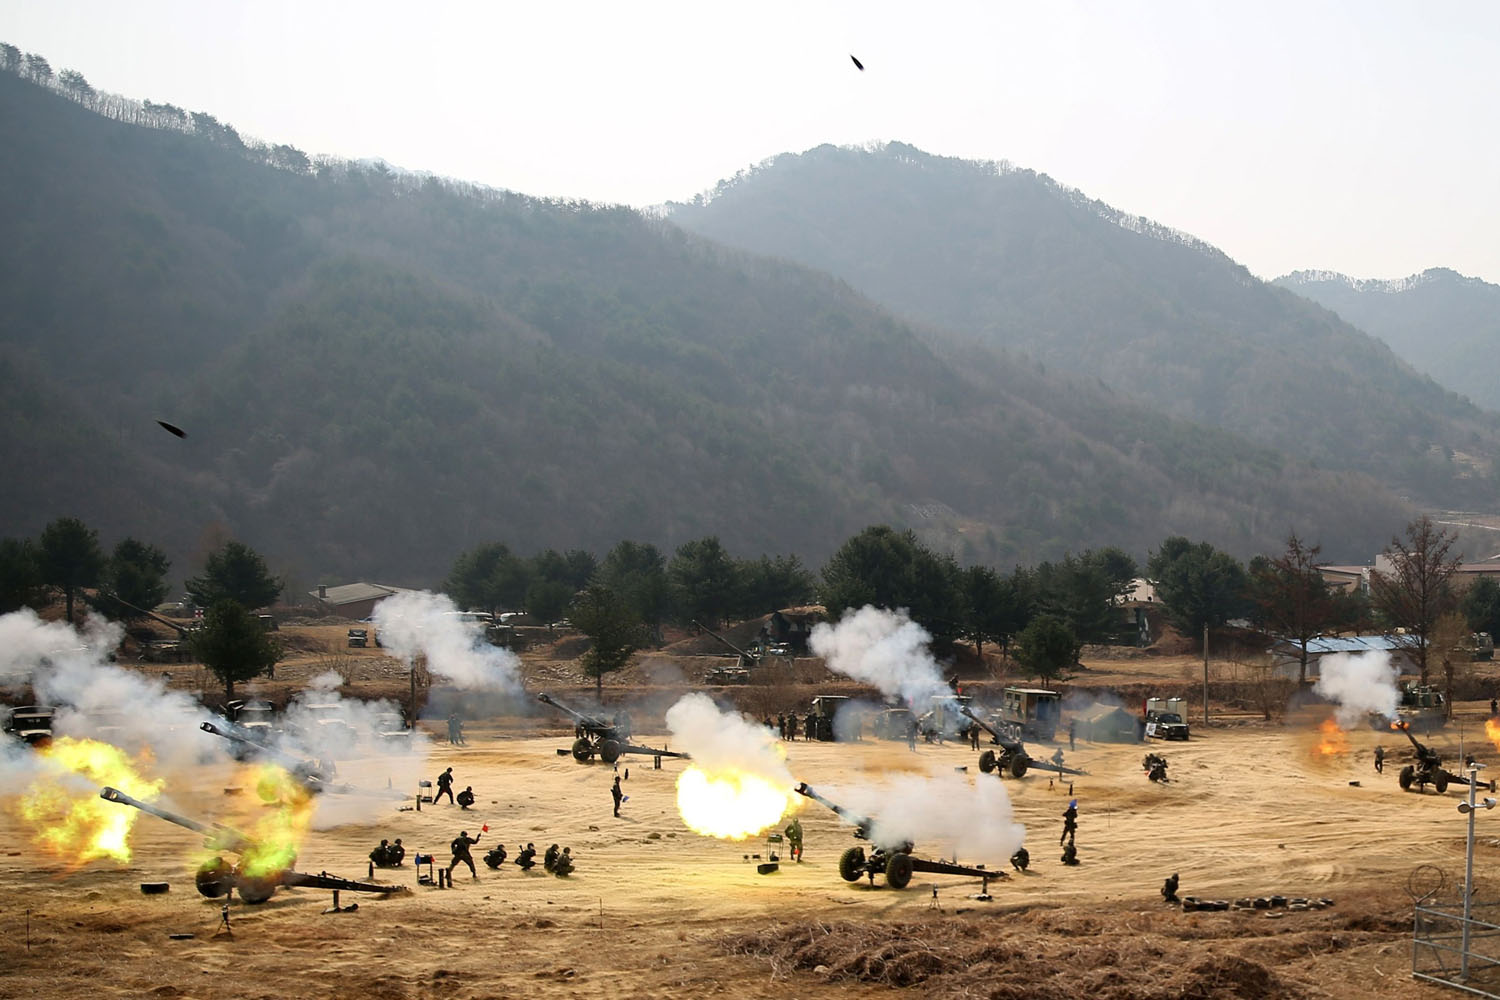 Towed 155mm Howitzers fire during an artillery drill in Inje near the demilitarized zone (DMZ) which separates the two Korea